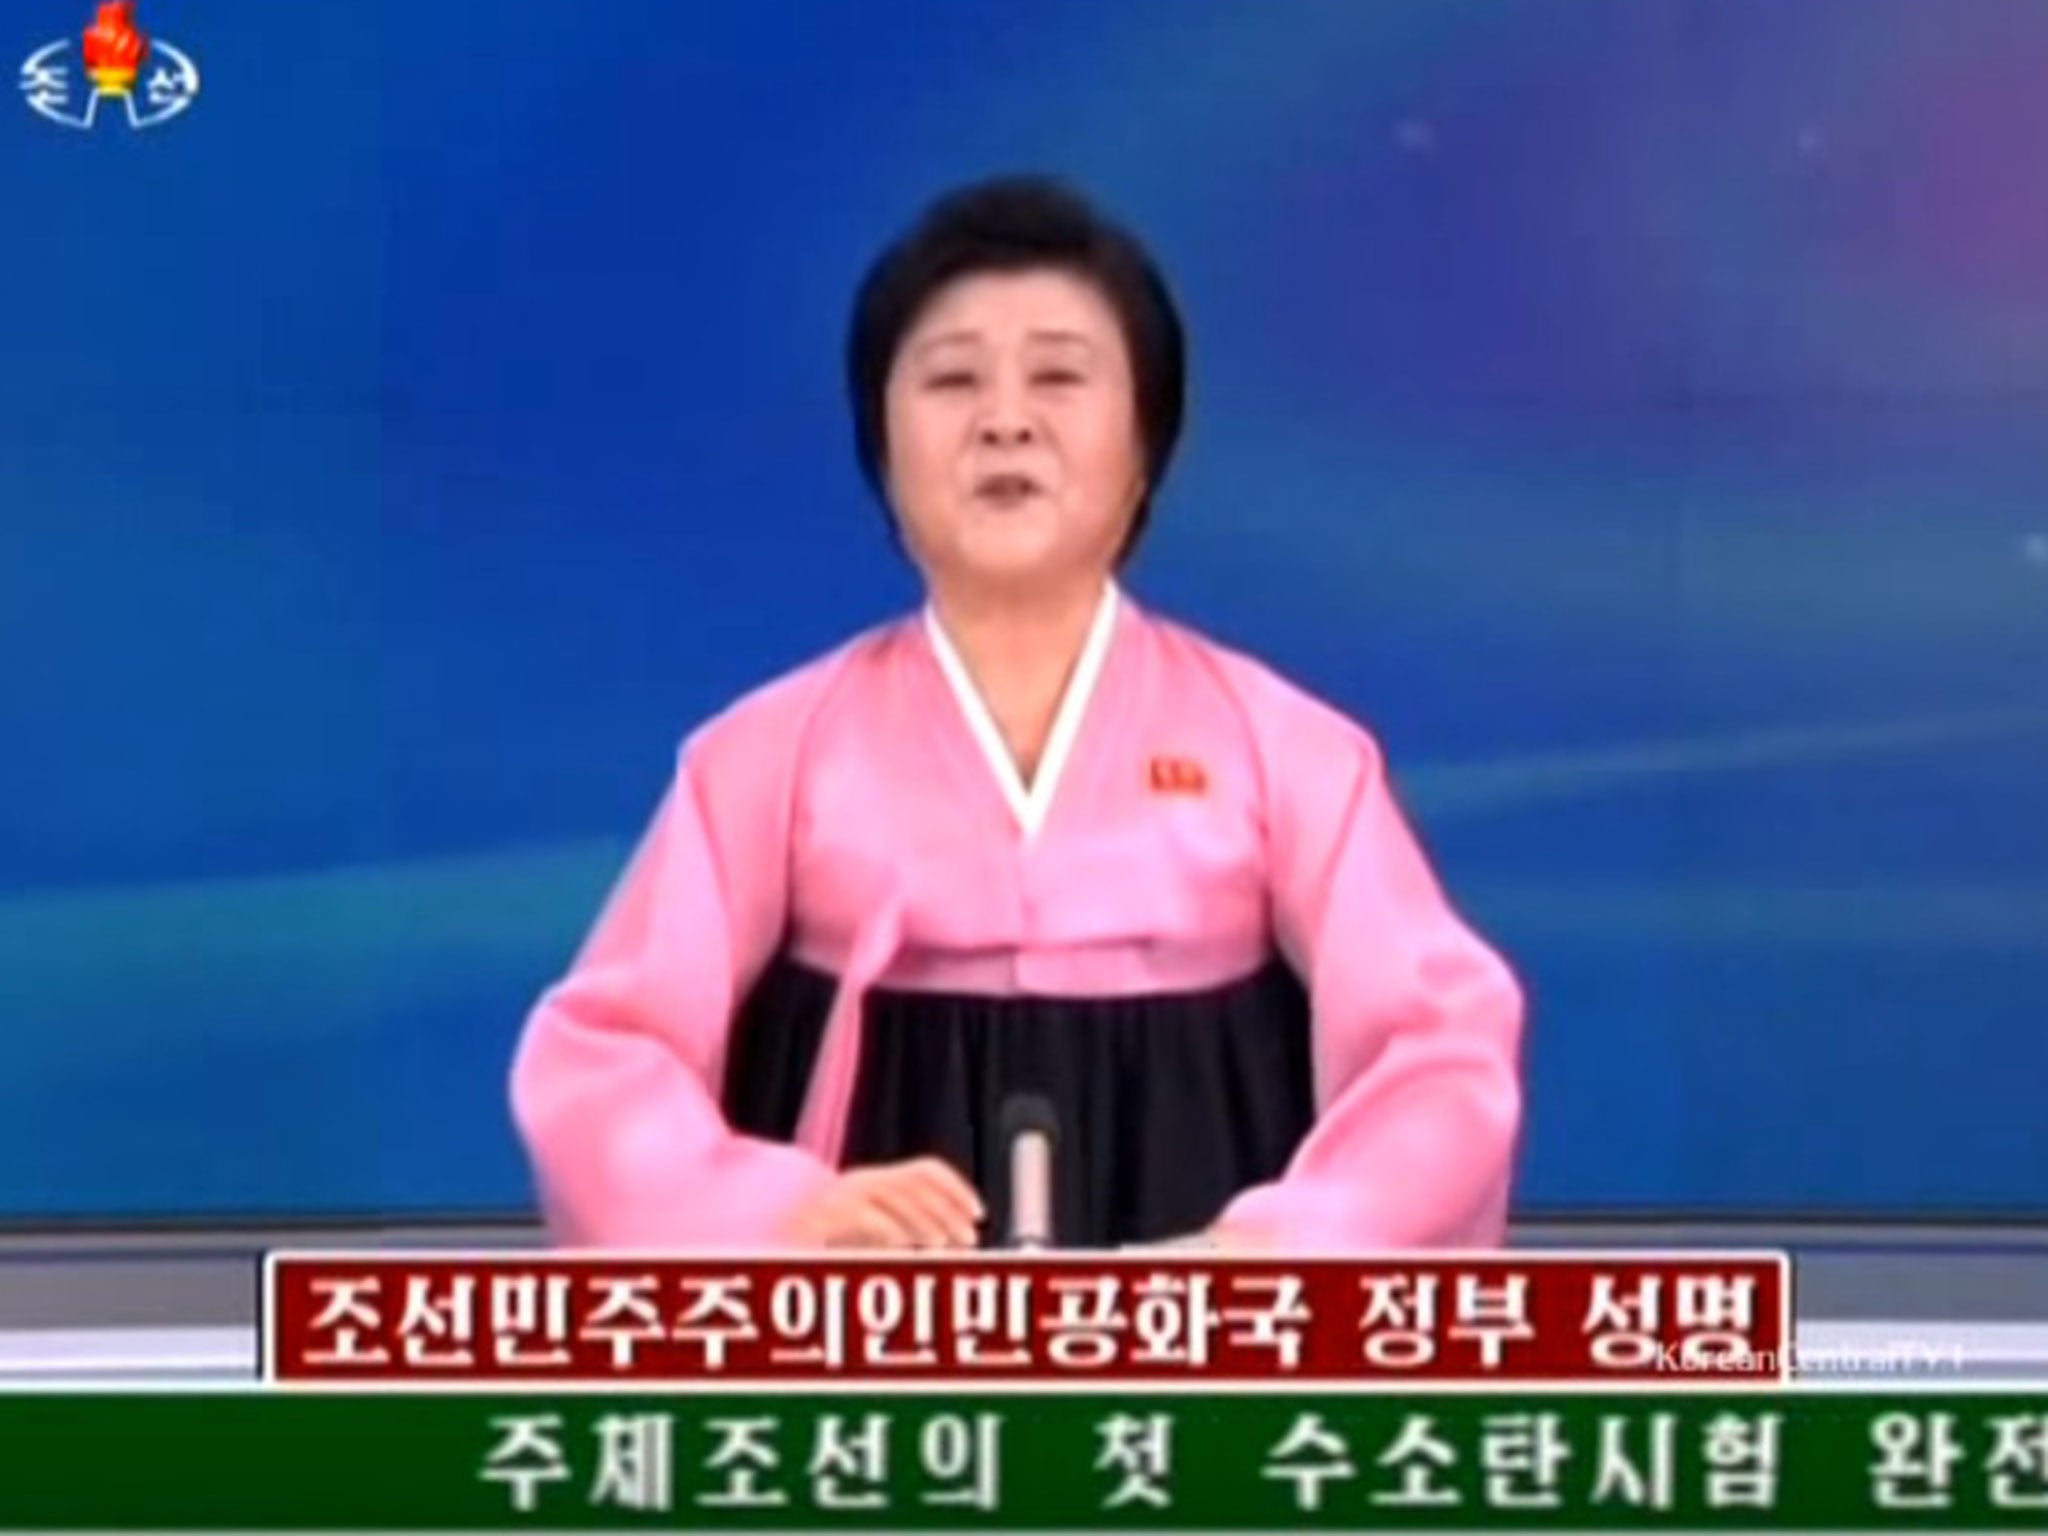 North Korean state broadcaster KCTV announced the news to its citizens